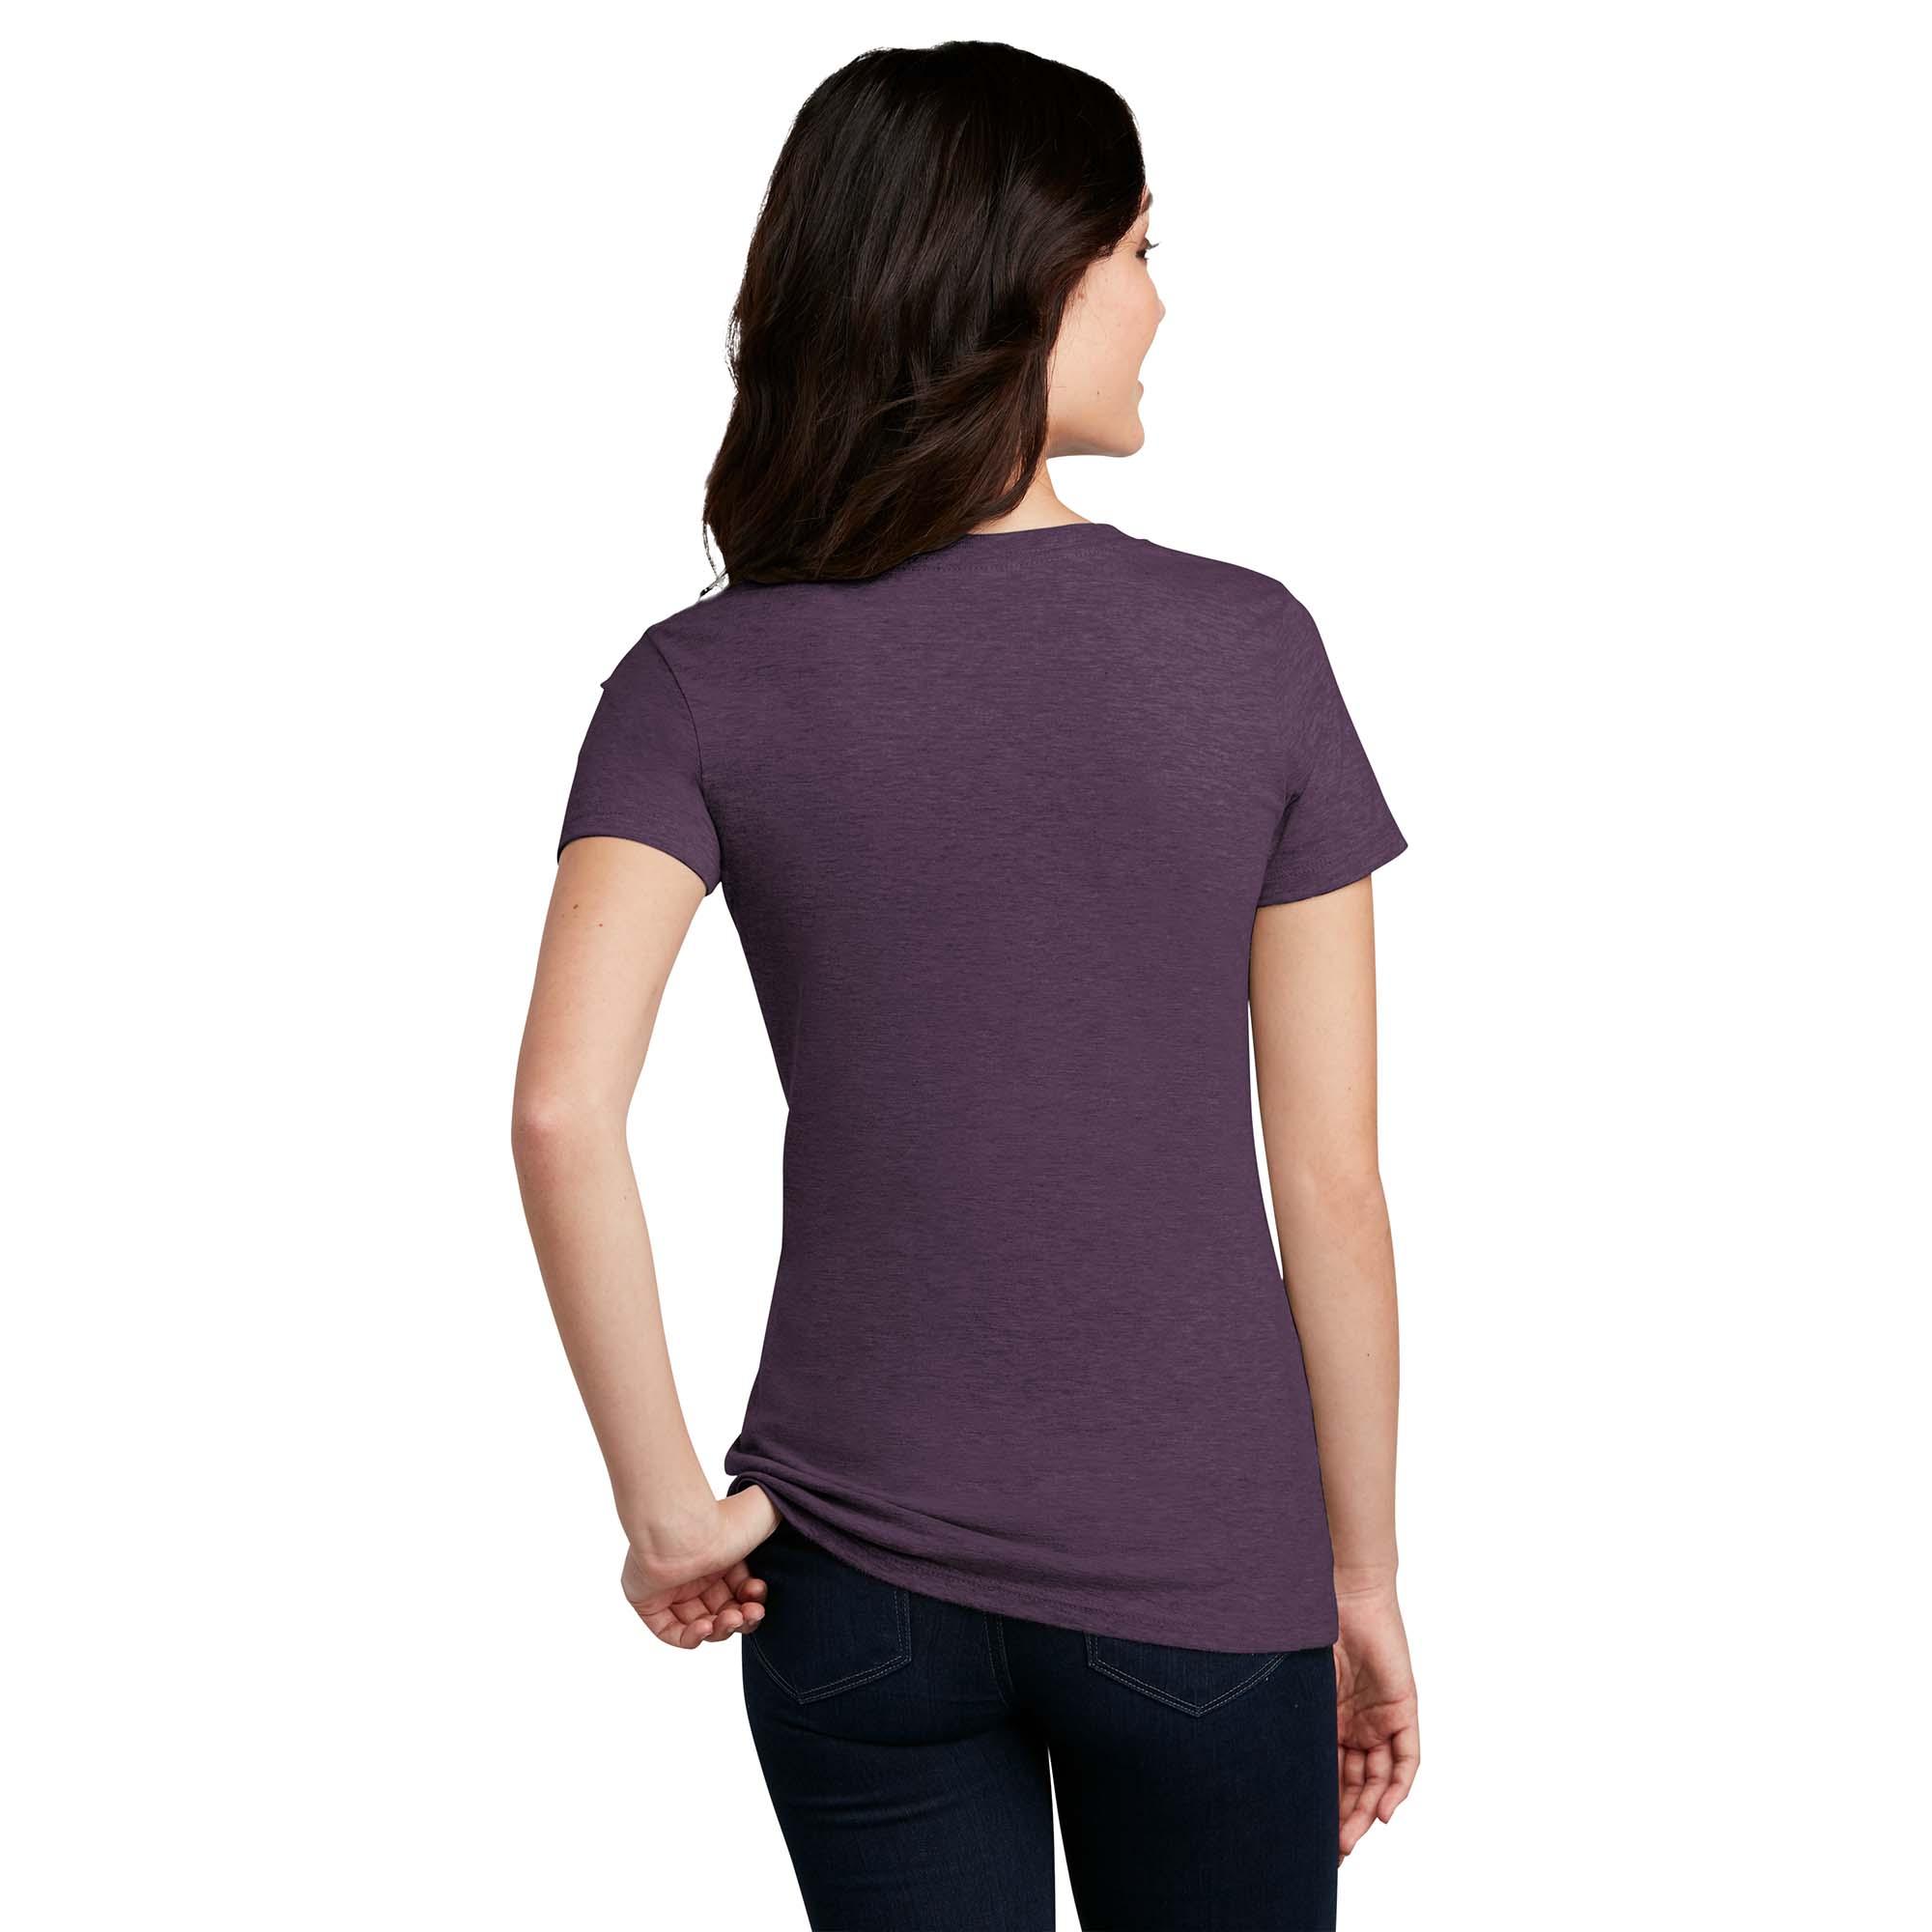 District Made DM108L Ladies Perfect Blend Crew Tee 